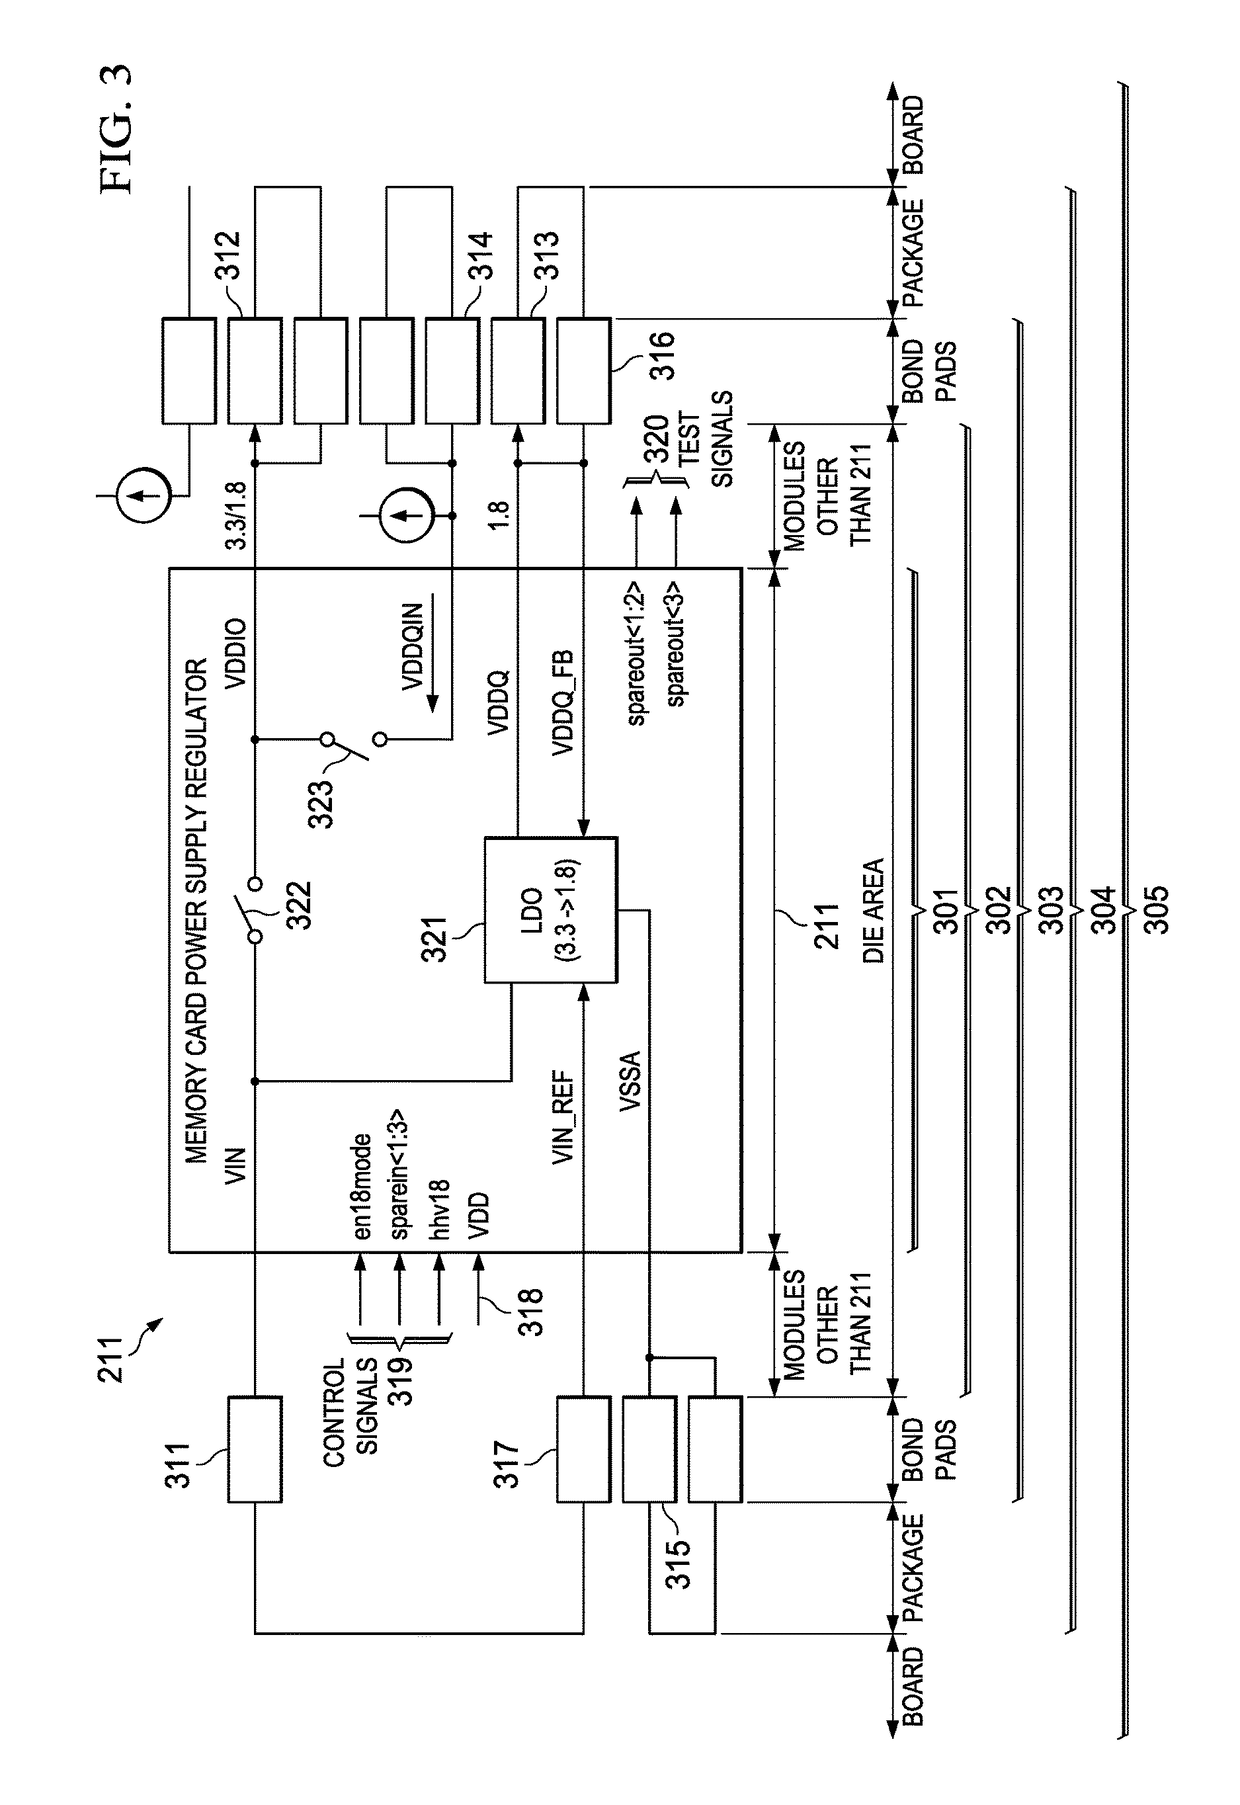 Integrated Power Supply Scheme for Powering Memory Card Host Interface